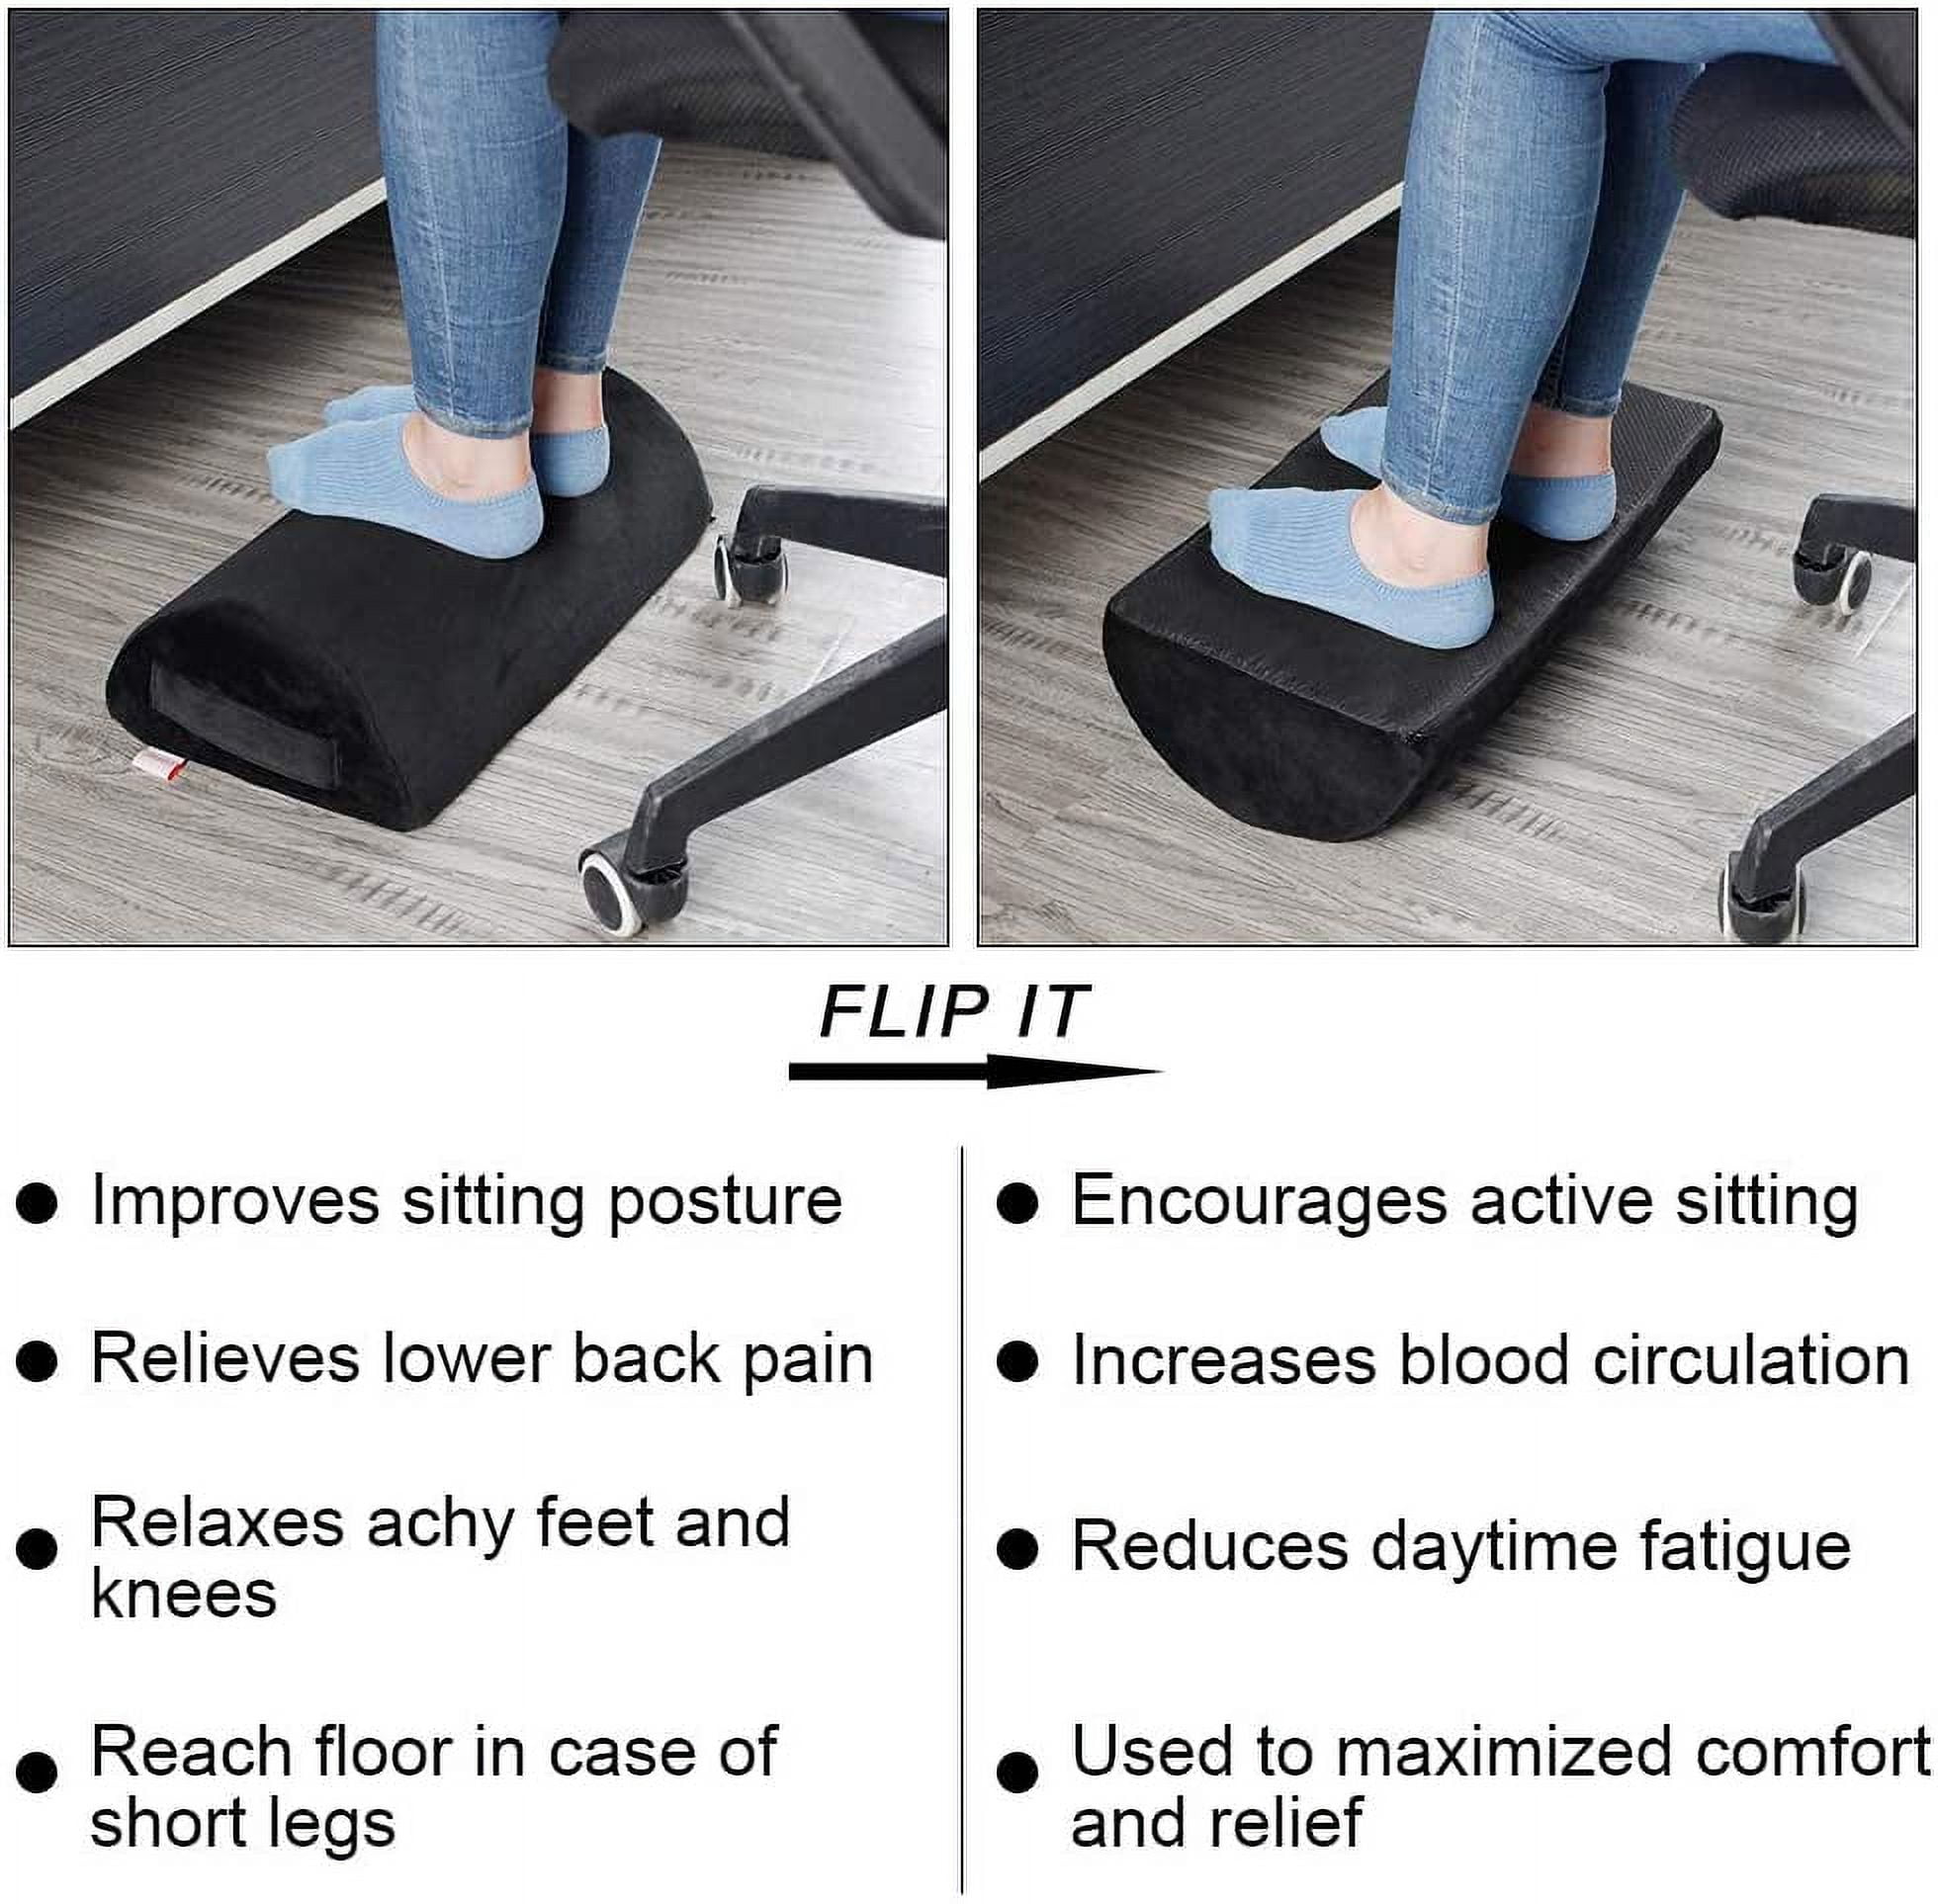 Foot Rest for Under Desk at Work, with 2 Optional Covers for Replacing,  Double Layer Adjustable Foot Stool for Office, Home, Airplane, Travel by